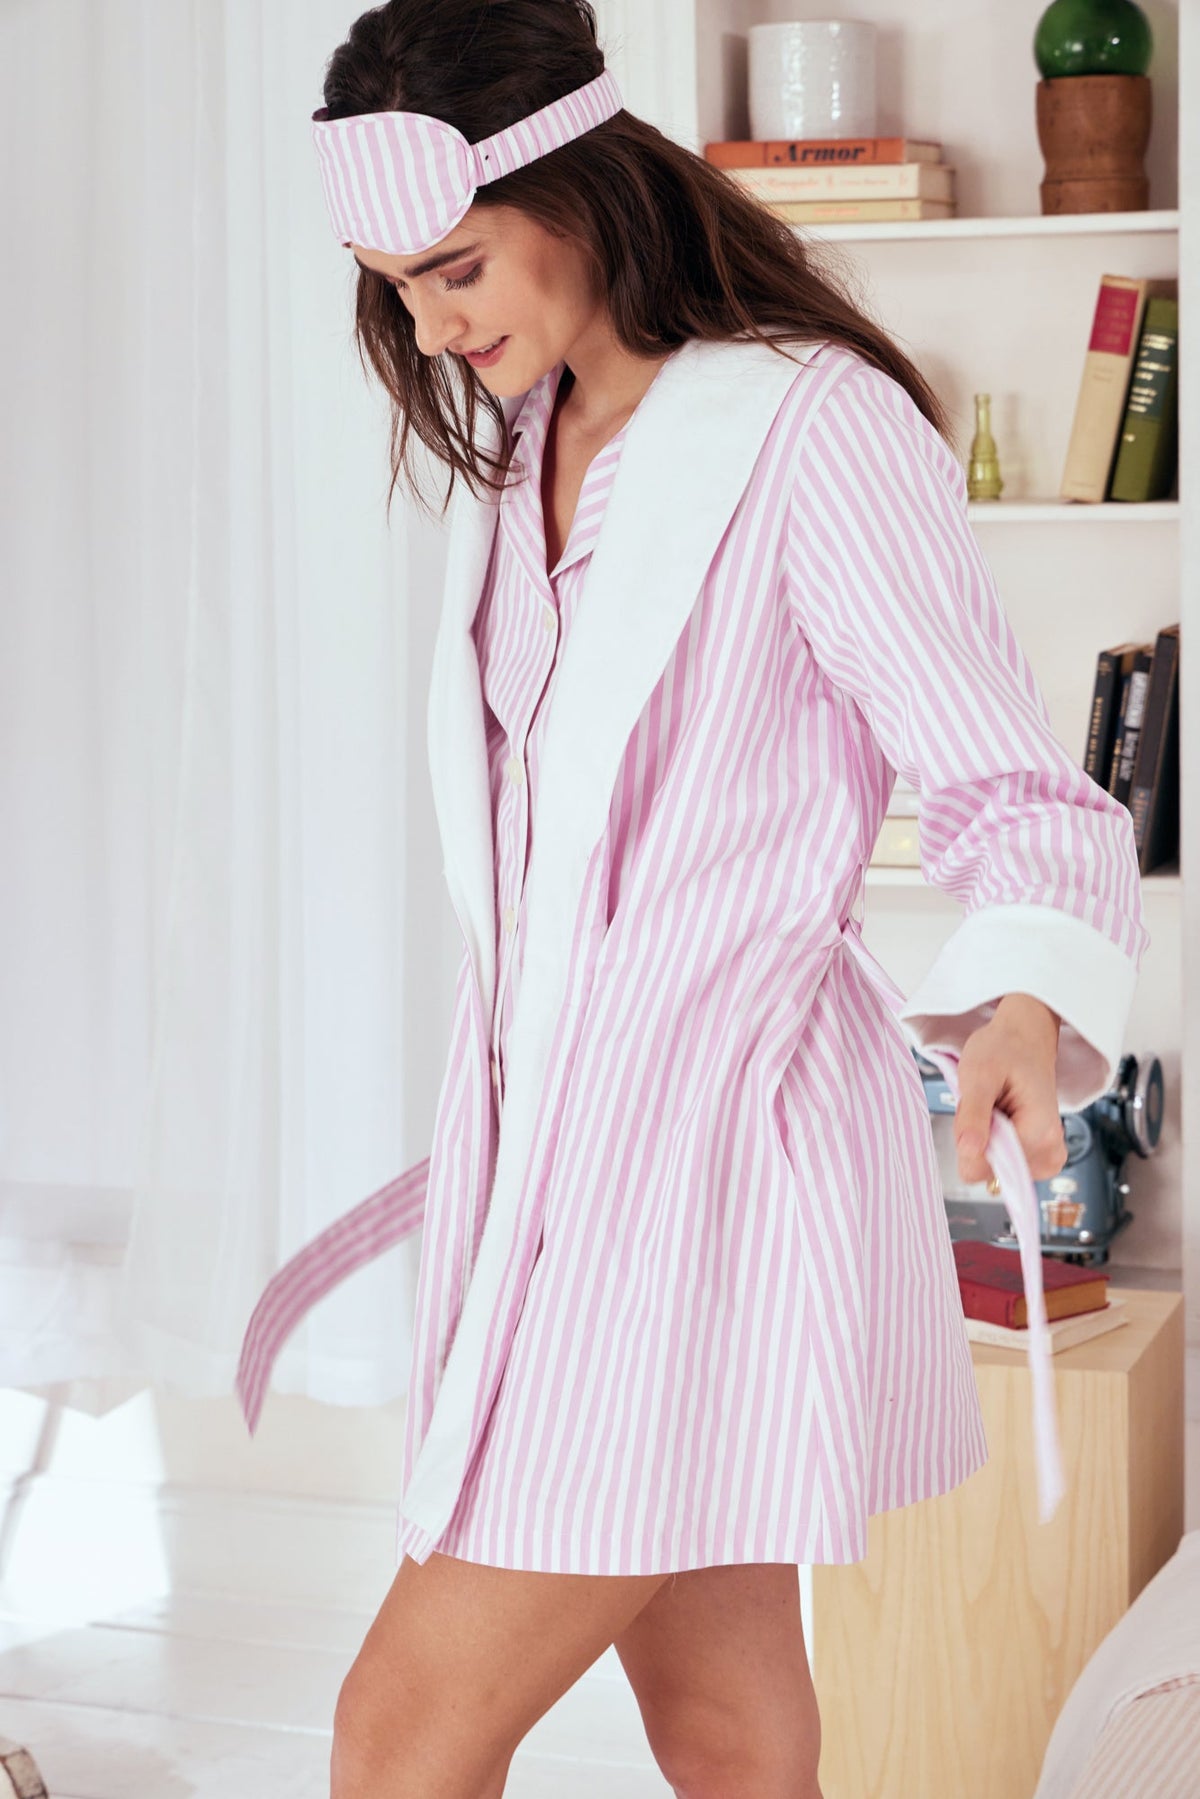 A lady wearing a pink and white stripes robe.